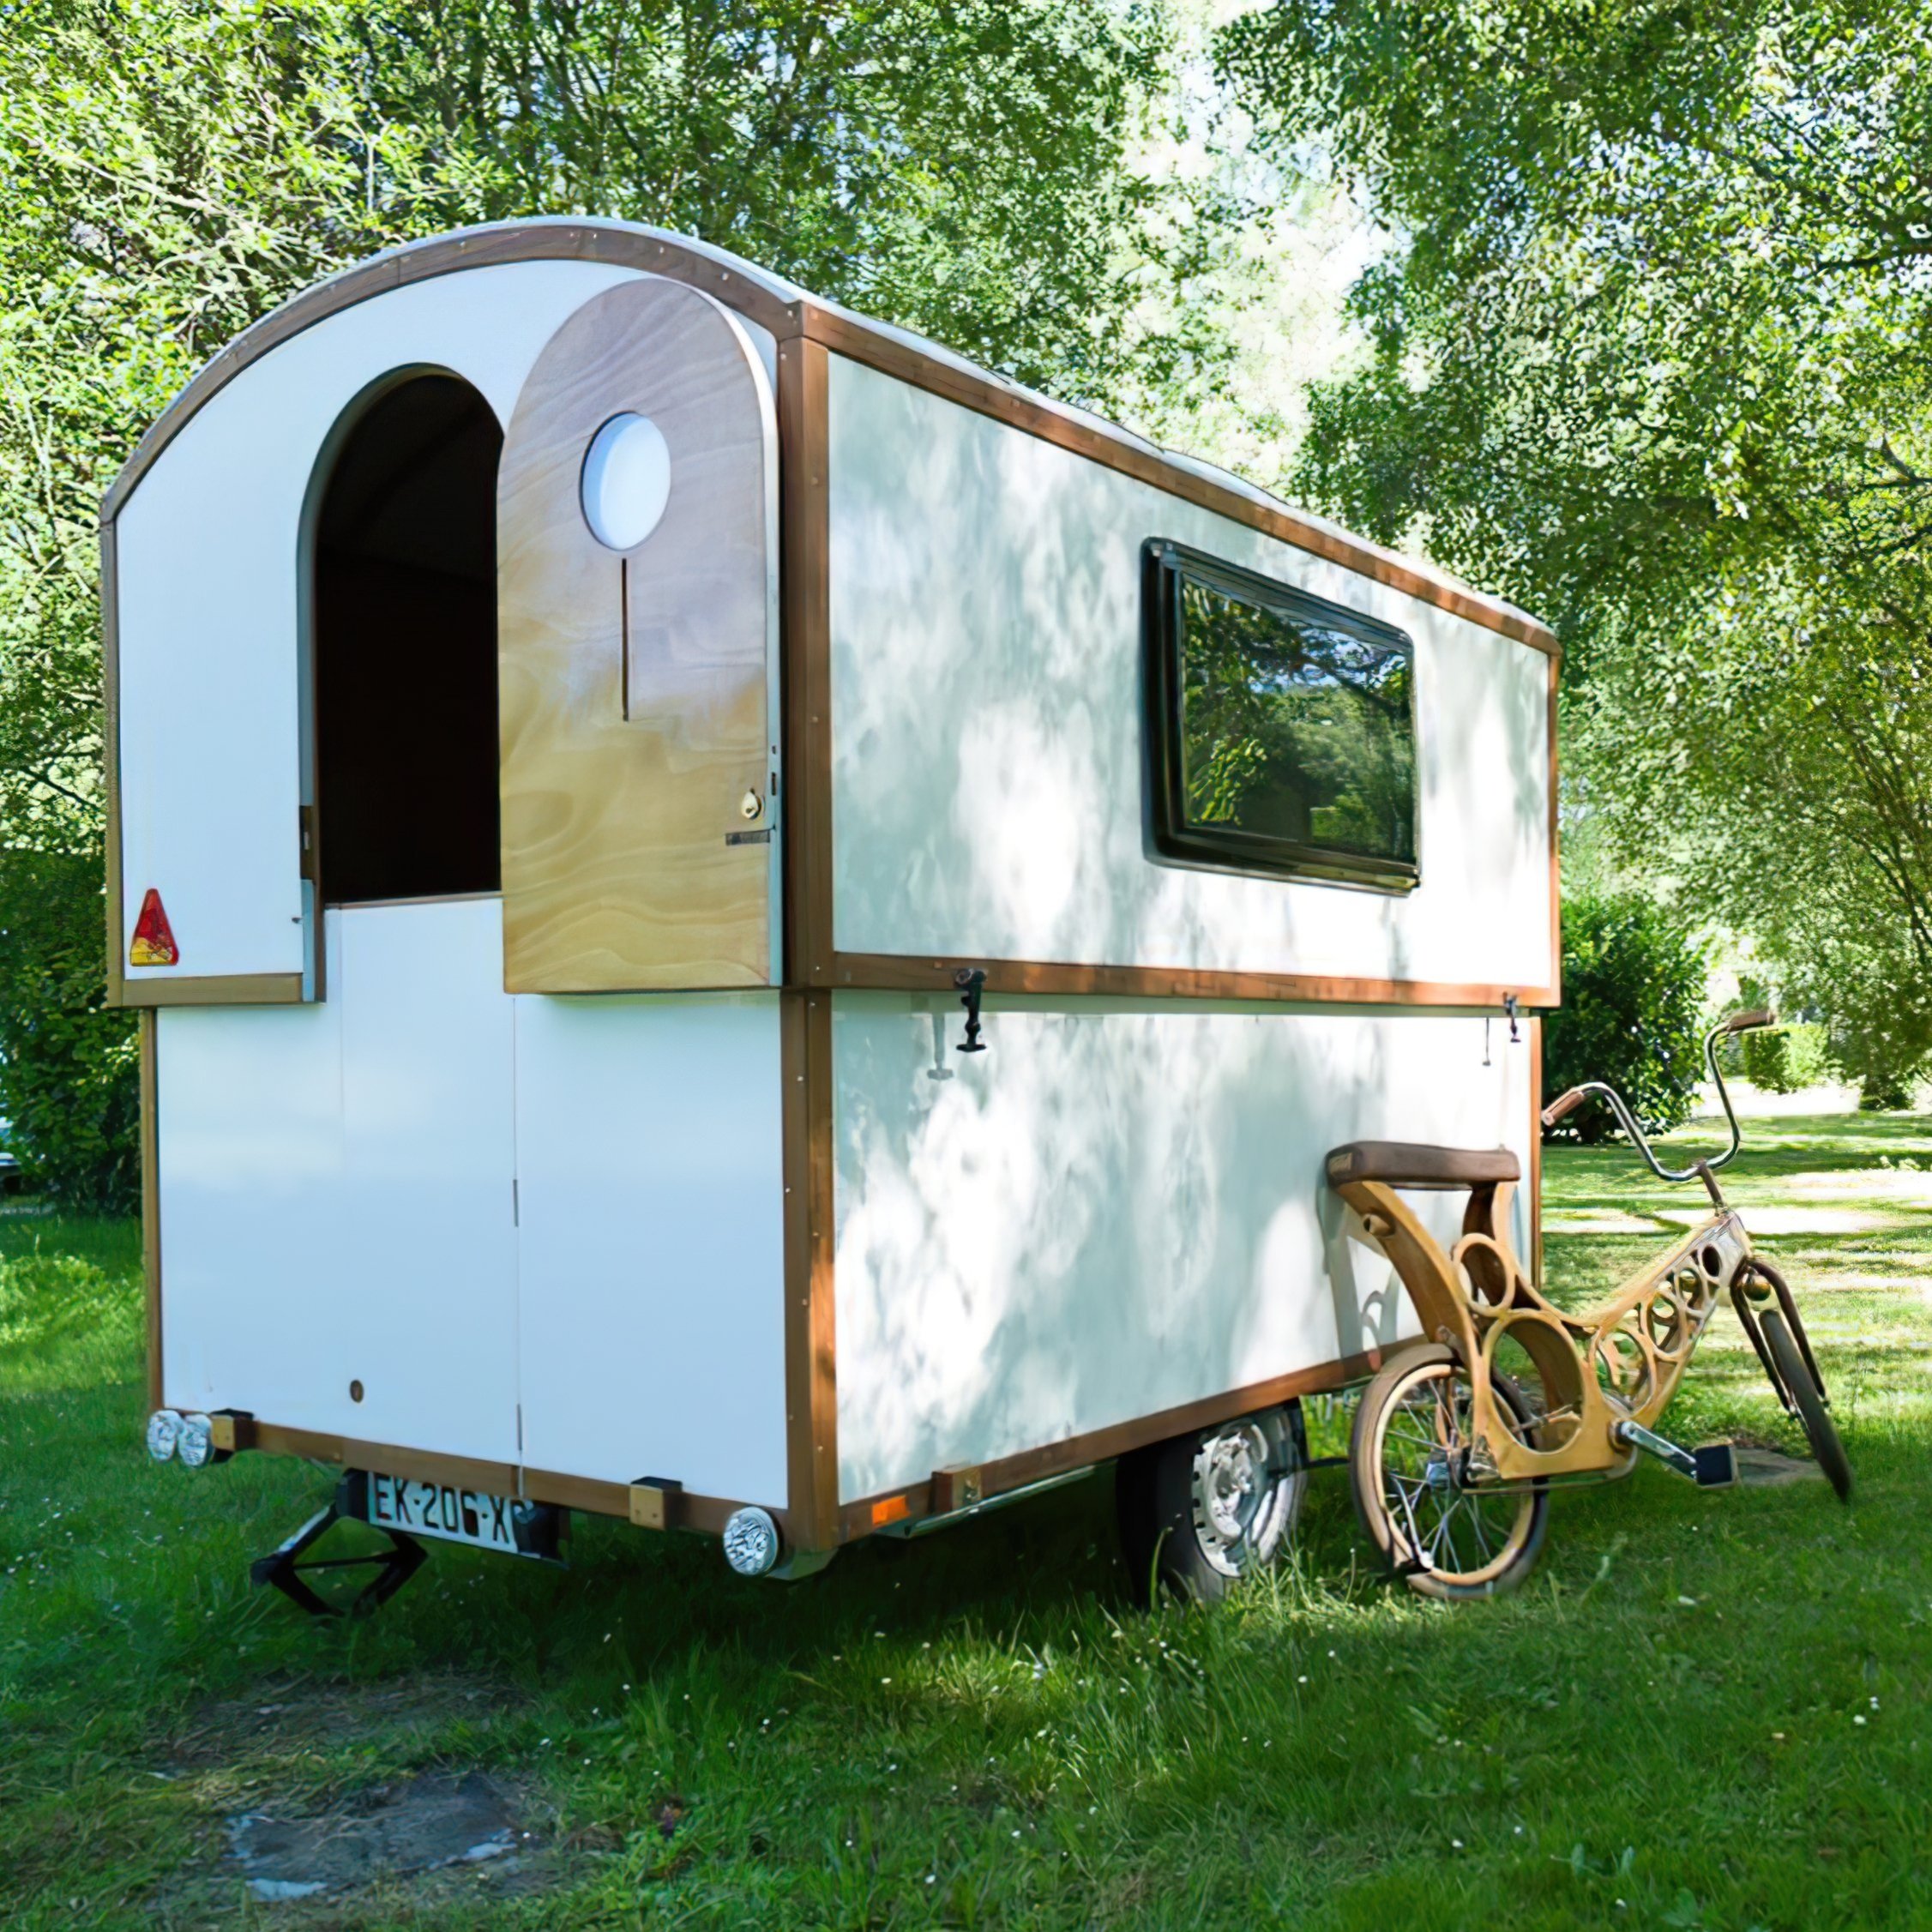  For travelers with an eye for DIY and love of customization, Woodenwidget is a fascinating company. You won't find a retail store or partners selling their campers or caravans.   They sell detailed plans and instructions to build your own. 